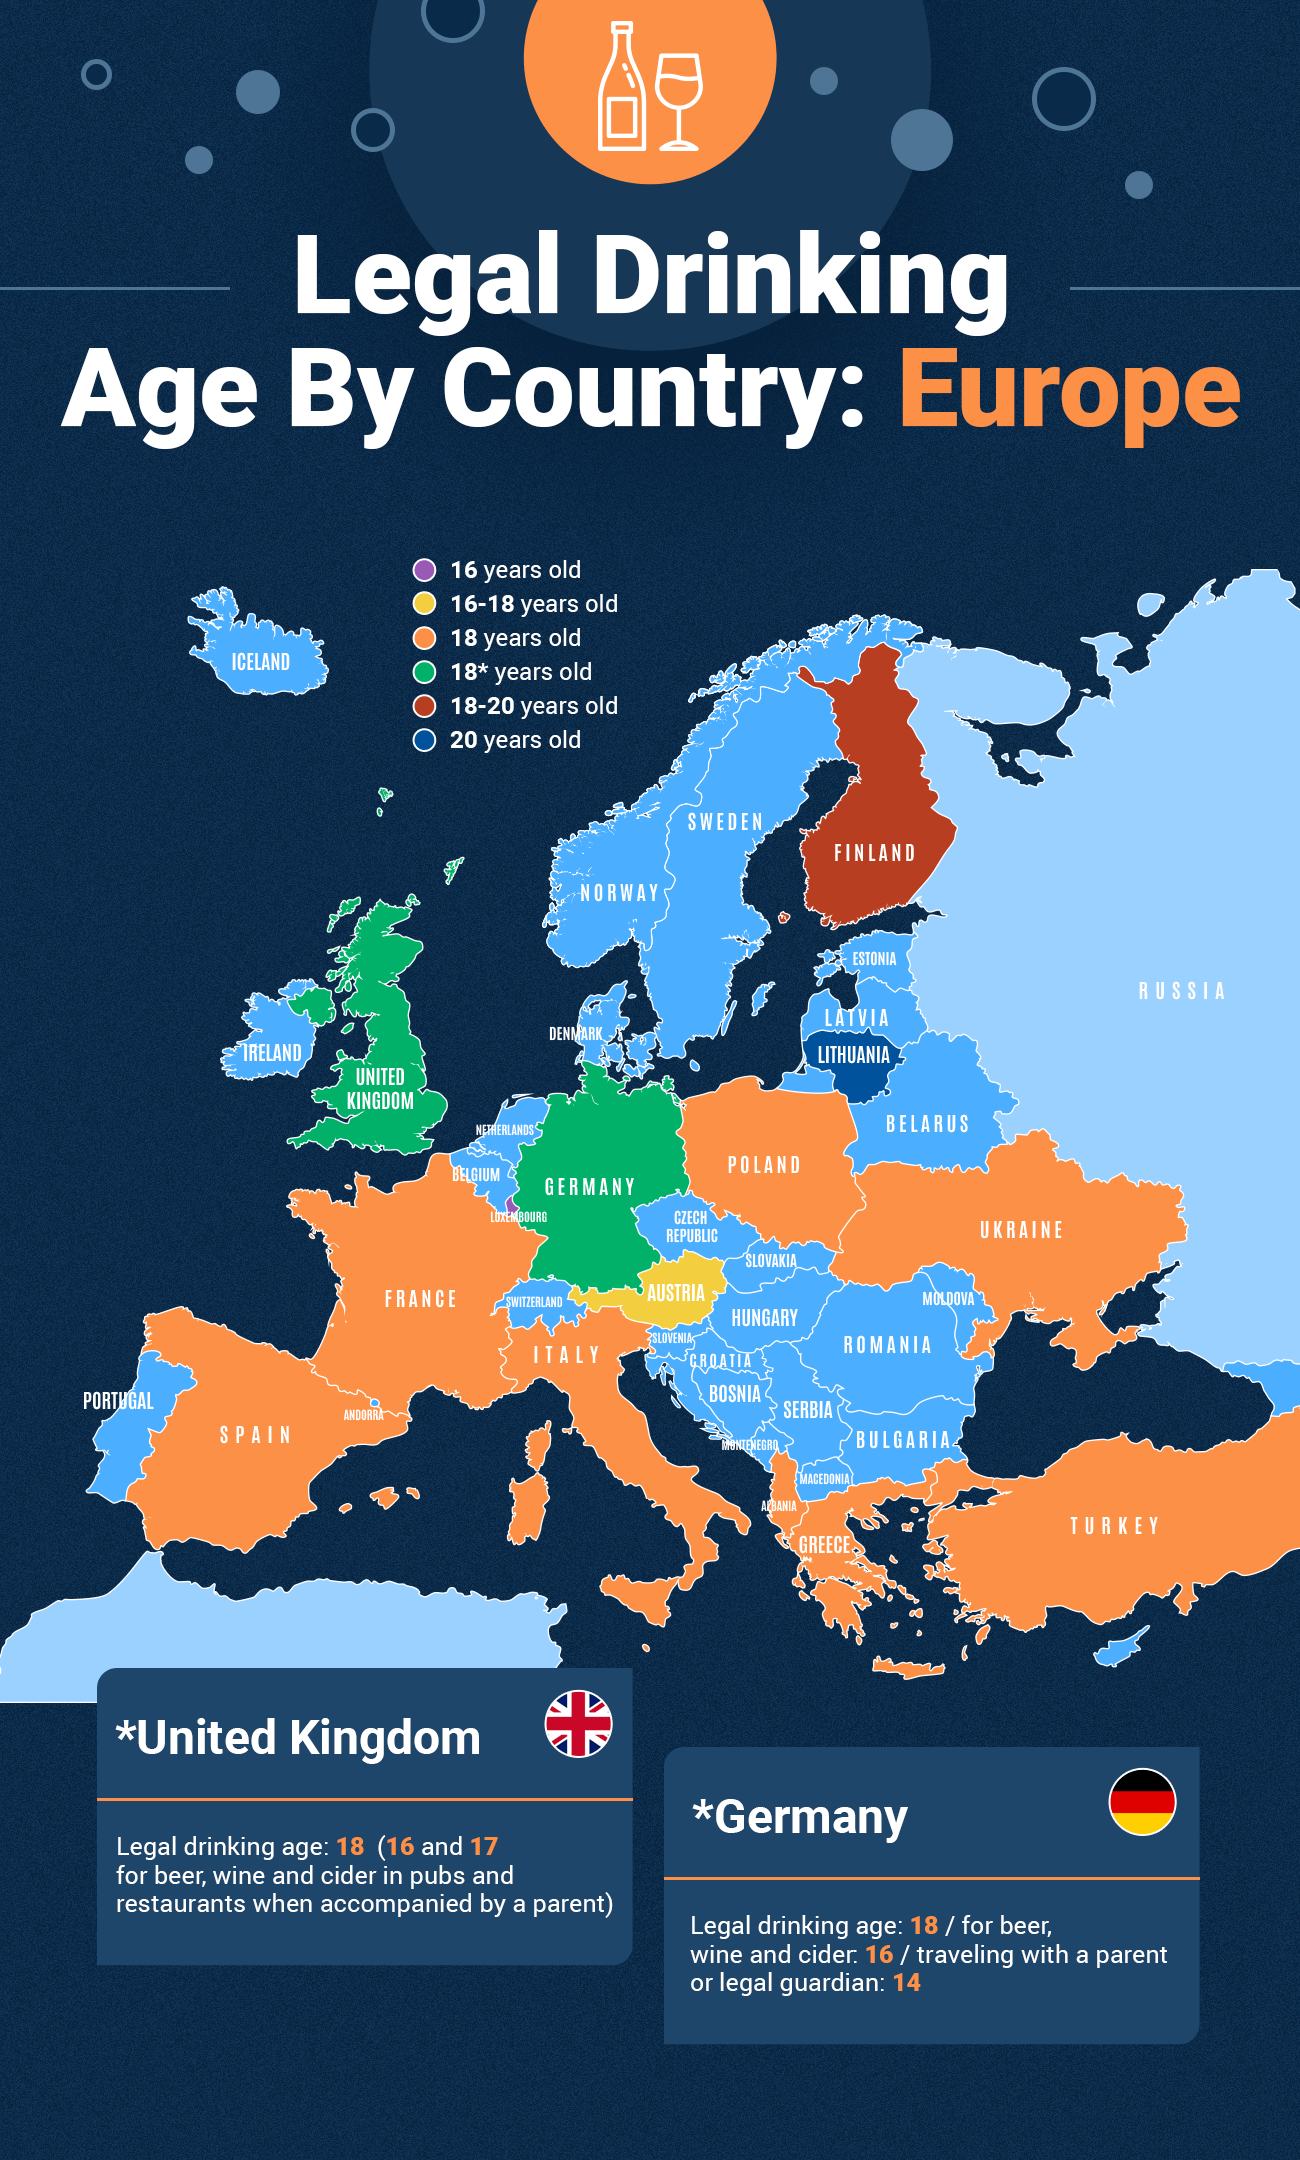 Map of Europe categorizing countries by drinking age.